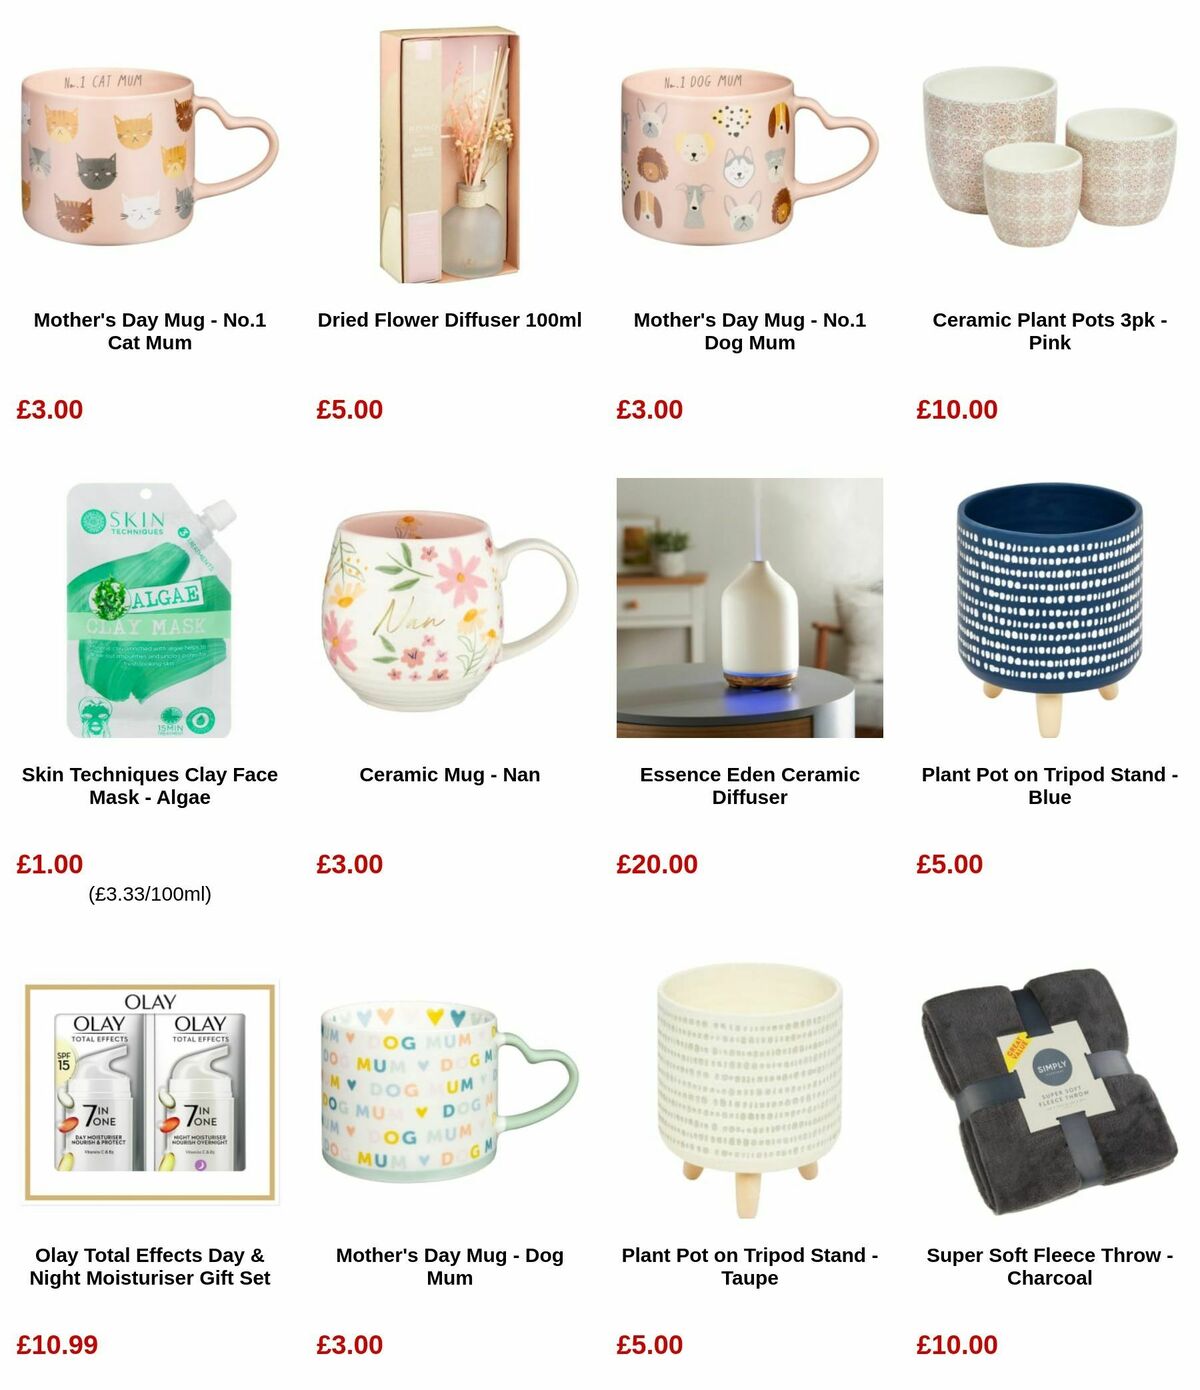 B&M Mother's Day Offers from 29 February